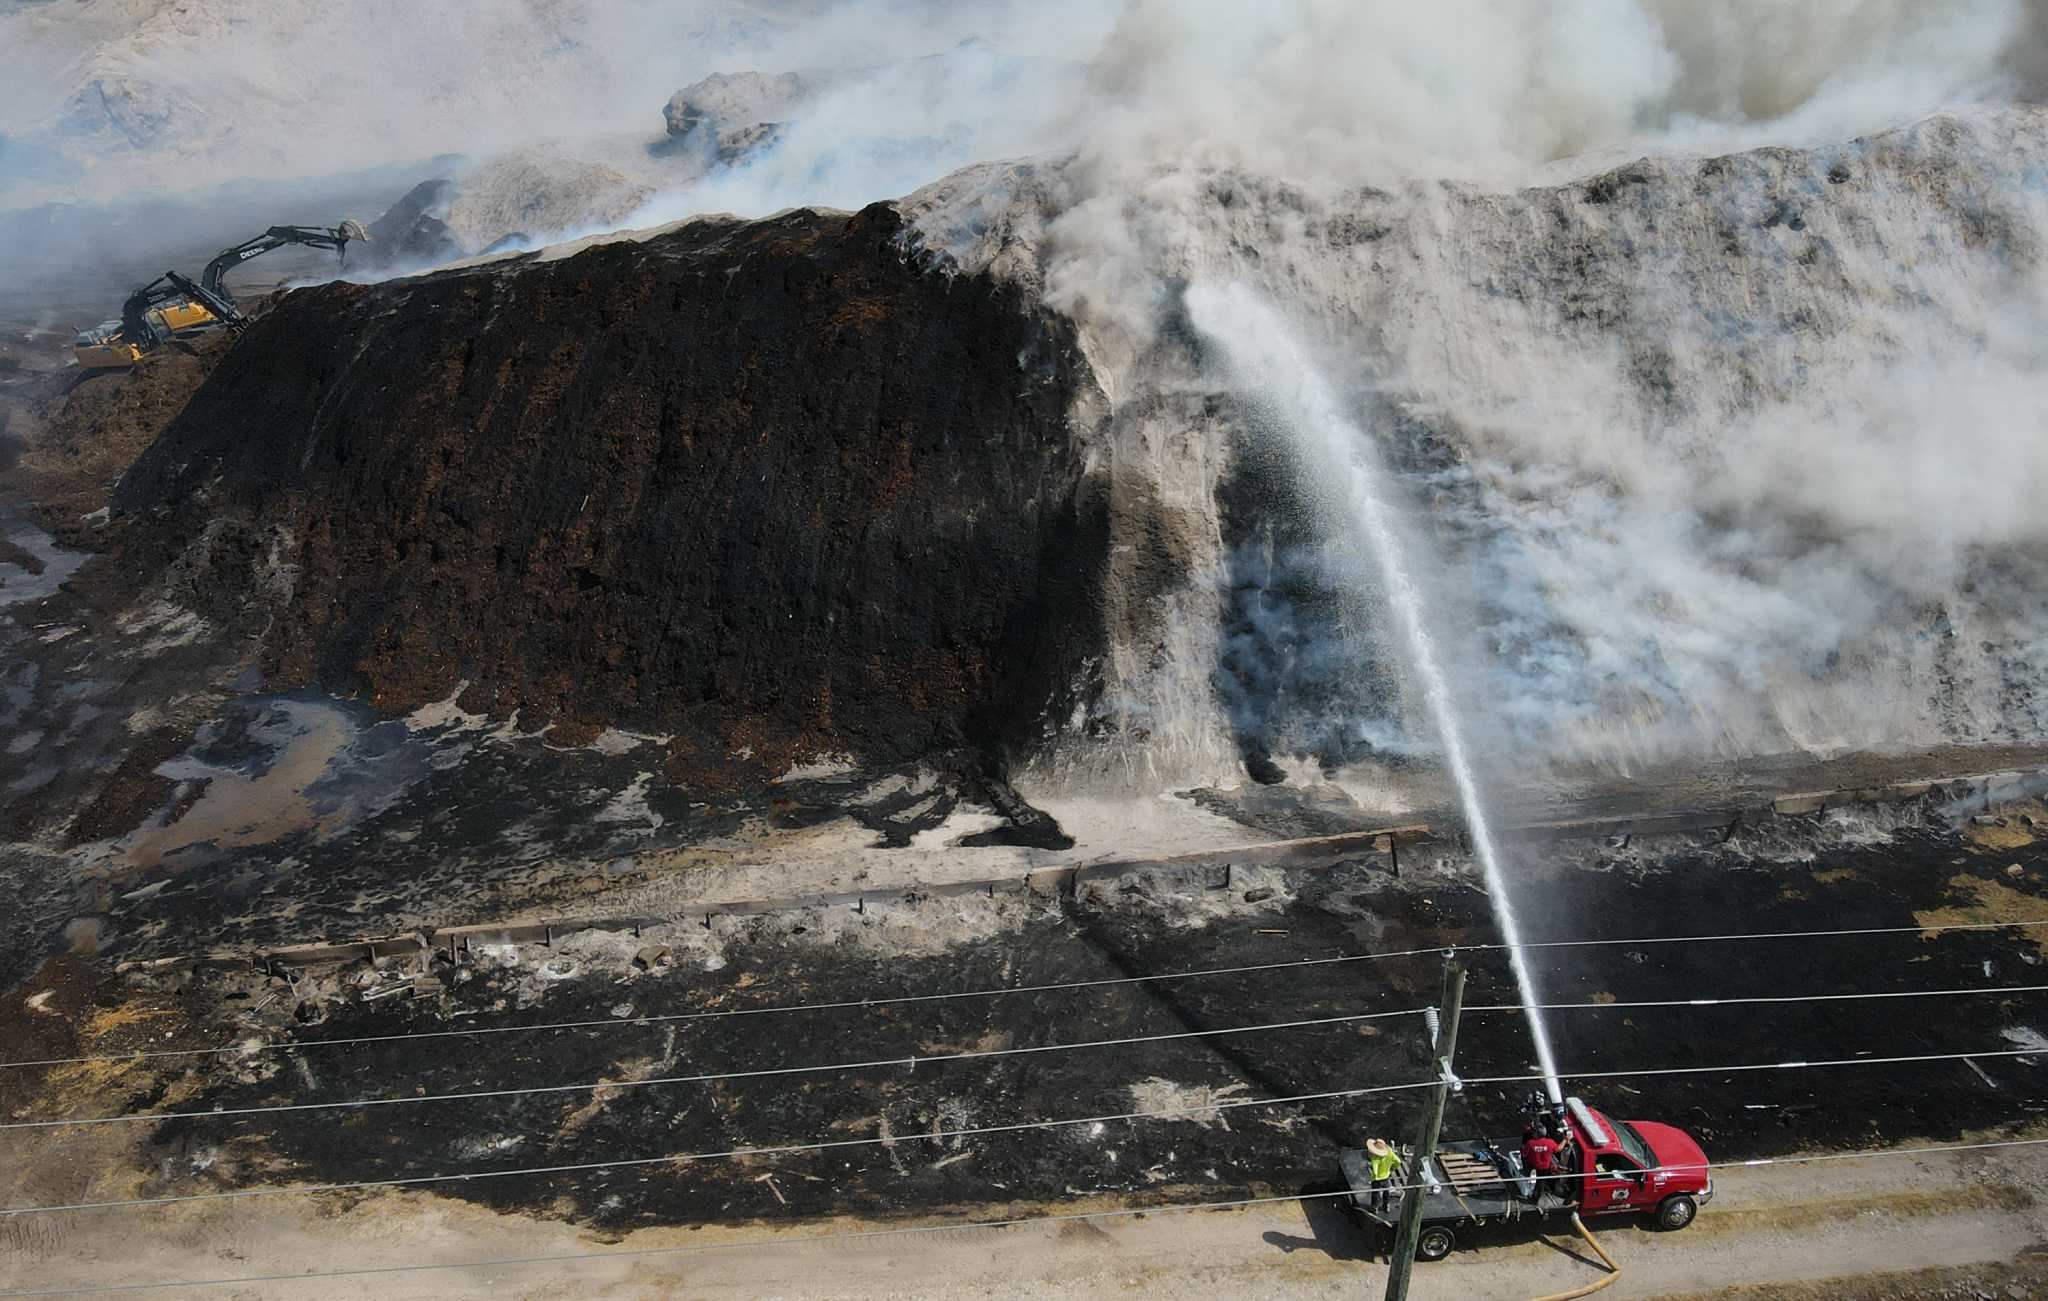 Large mulch fire burning for days likely caused by spontaneous